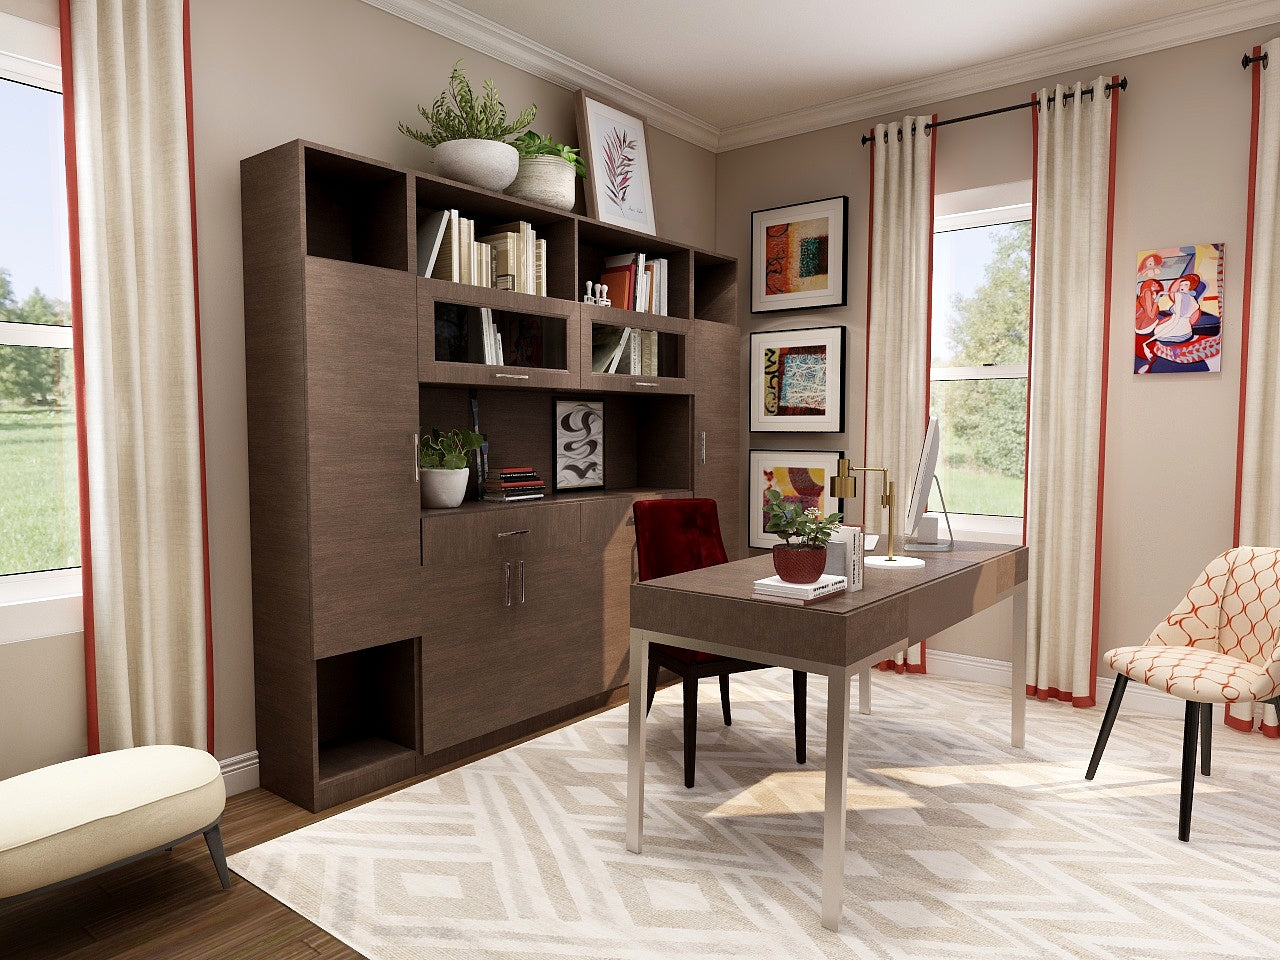 Photorealistic 3D render of an office really shows what a finished room will look like.  Preview rugs, fabrics, furniture layouts and artwork before commiting to your final purchases. It's the little details really make this design come together.